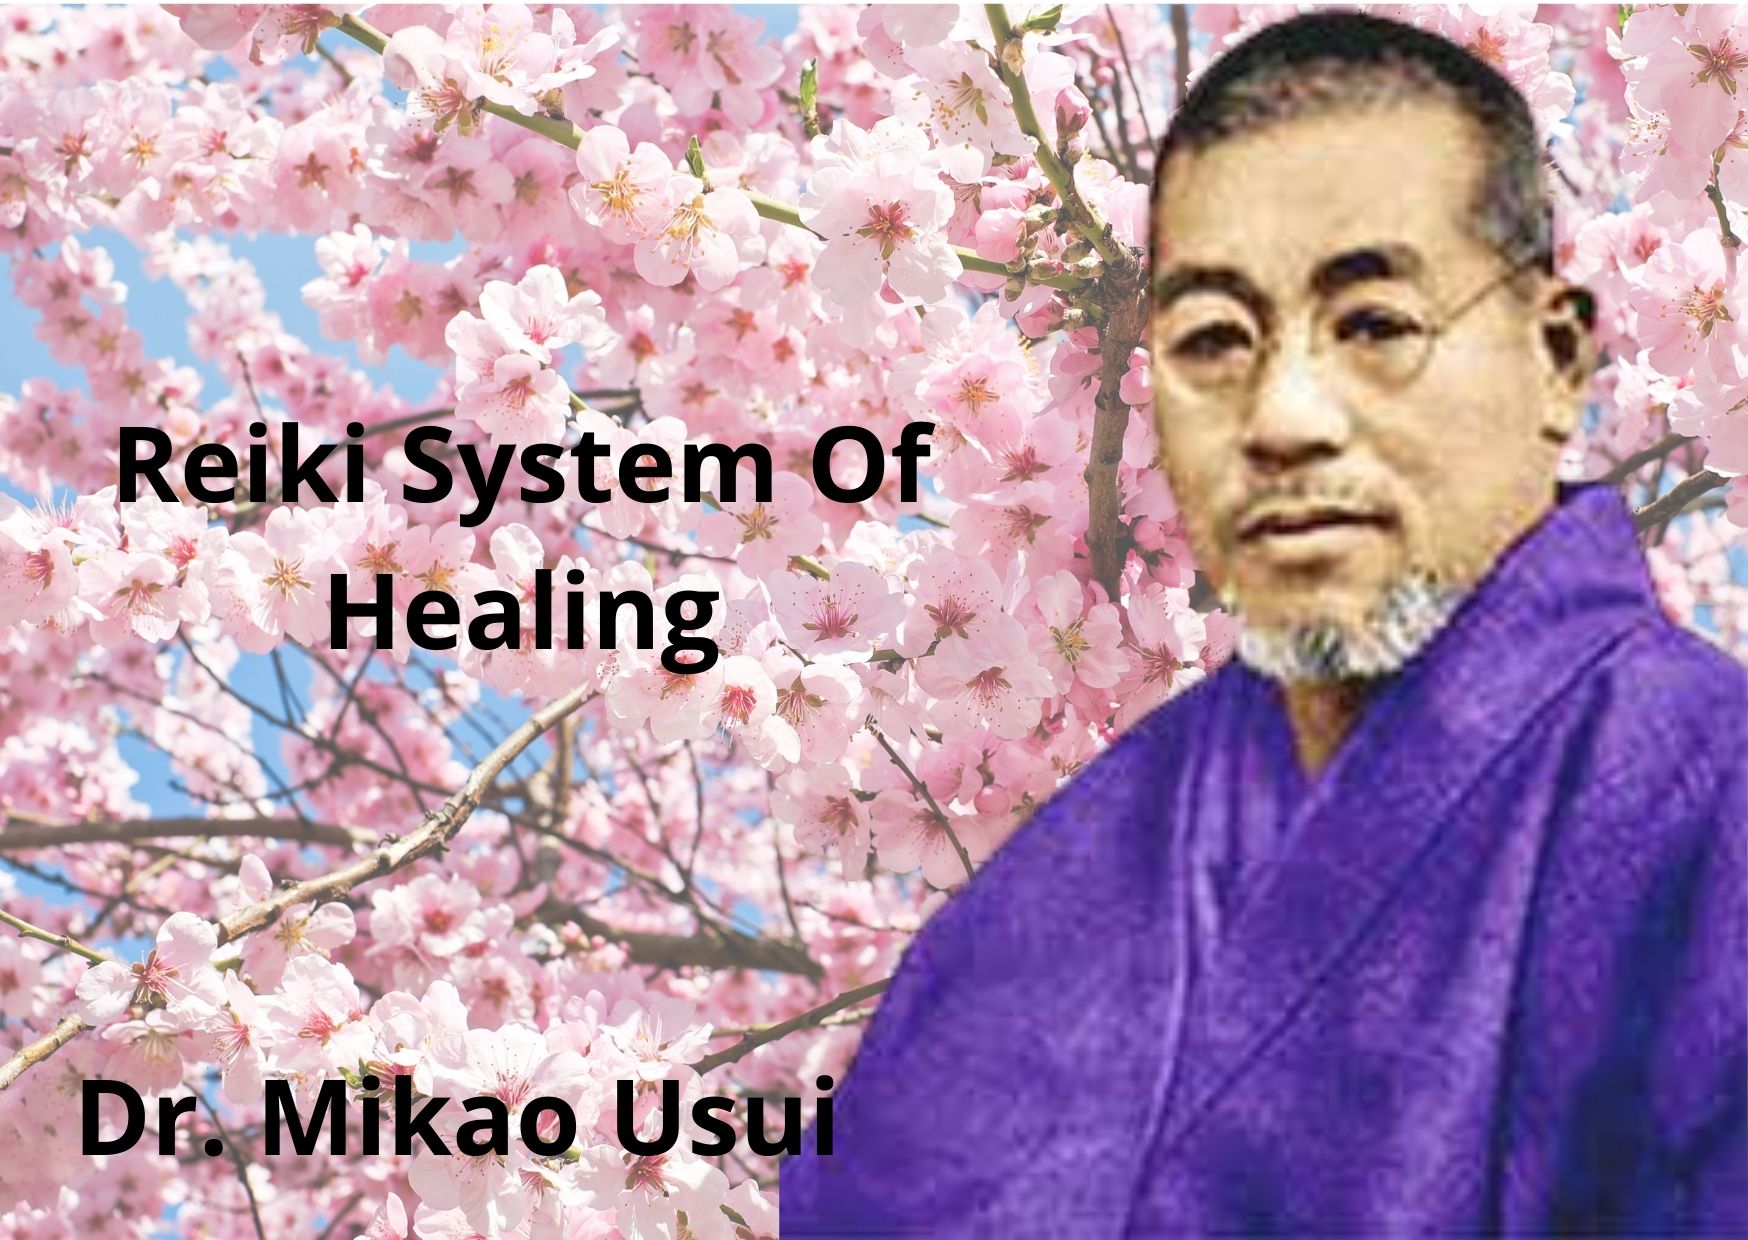 Dr. Mikao Usui wearing violet monk robe and round glasses